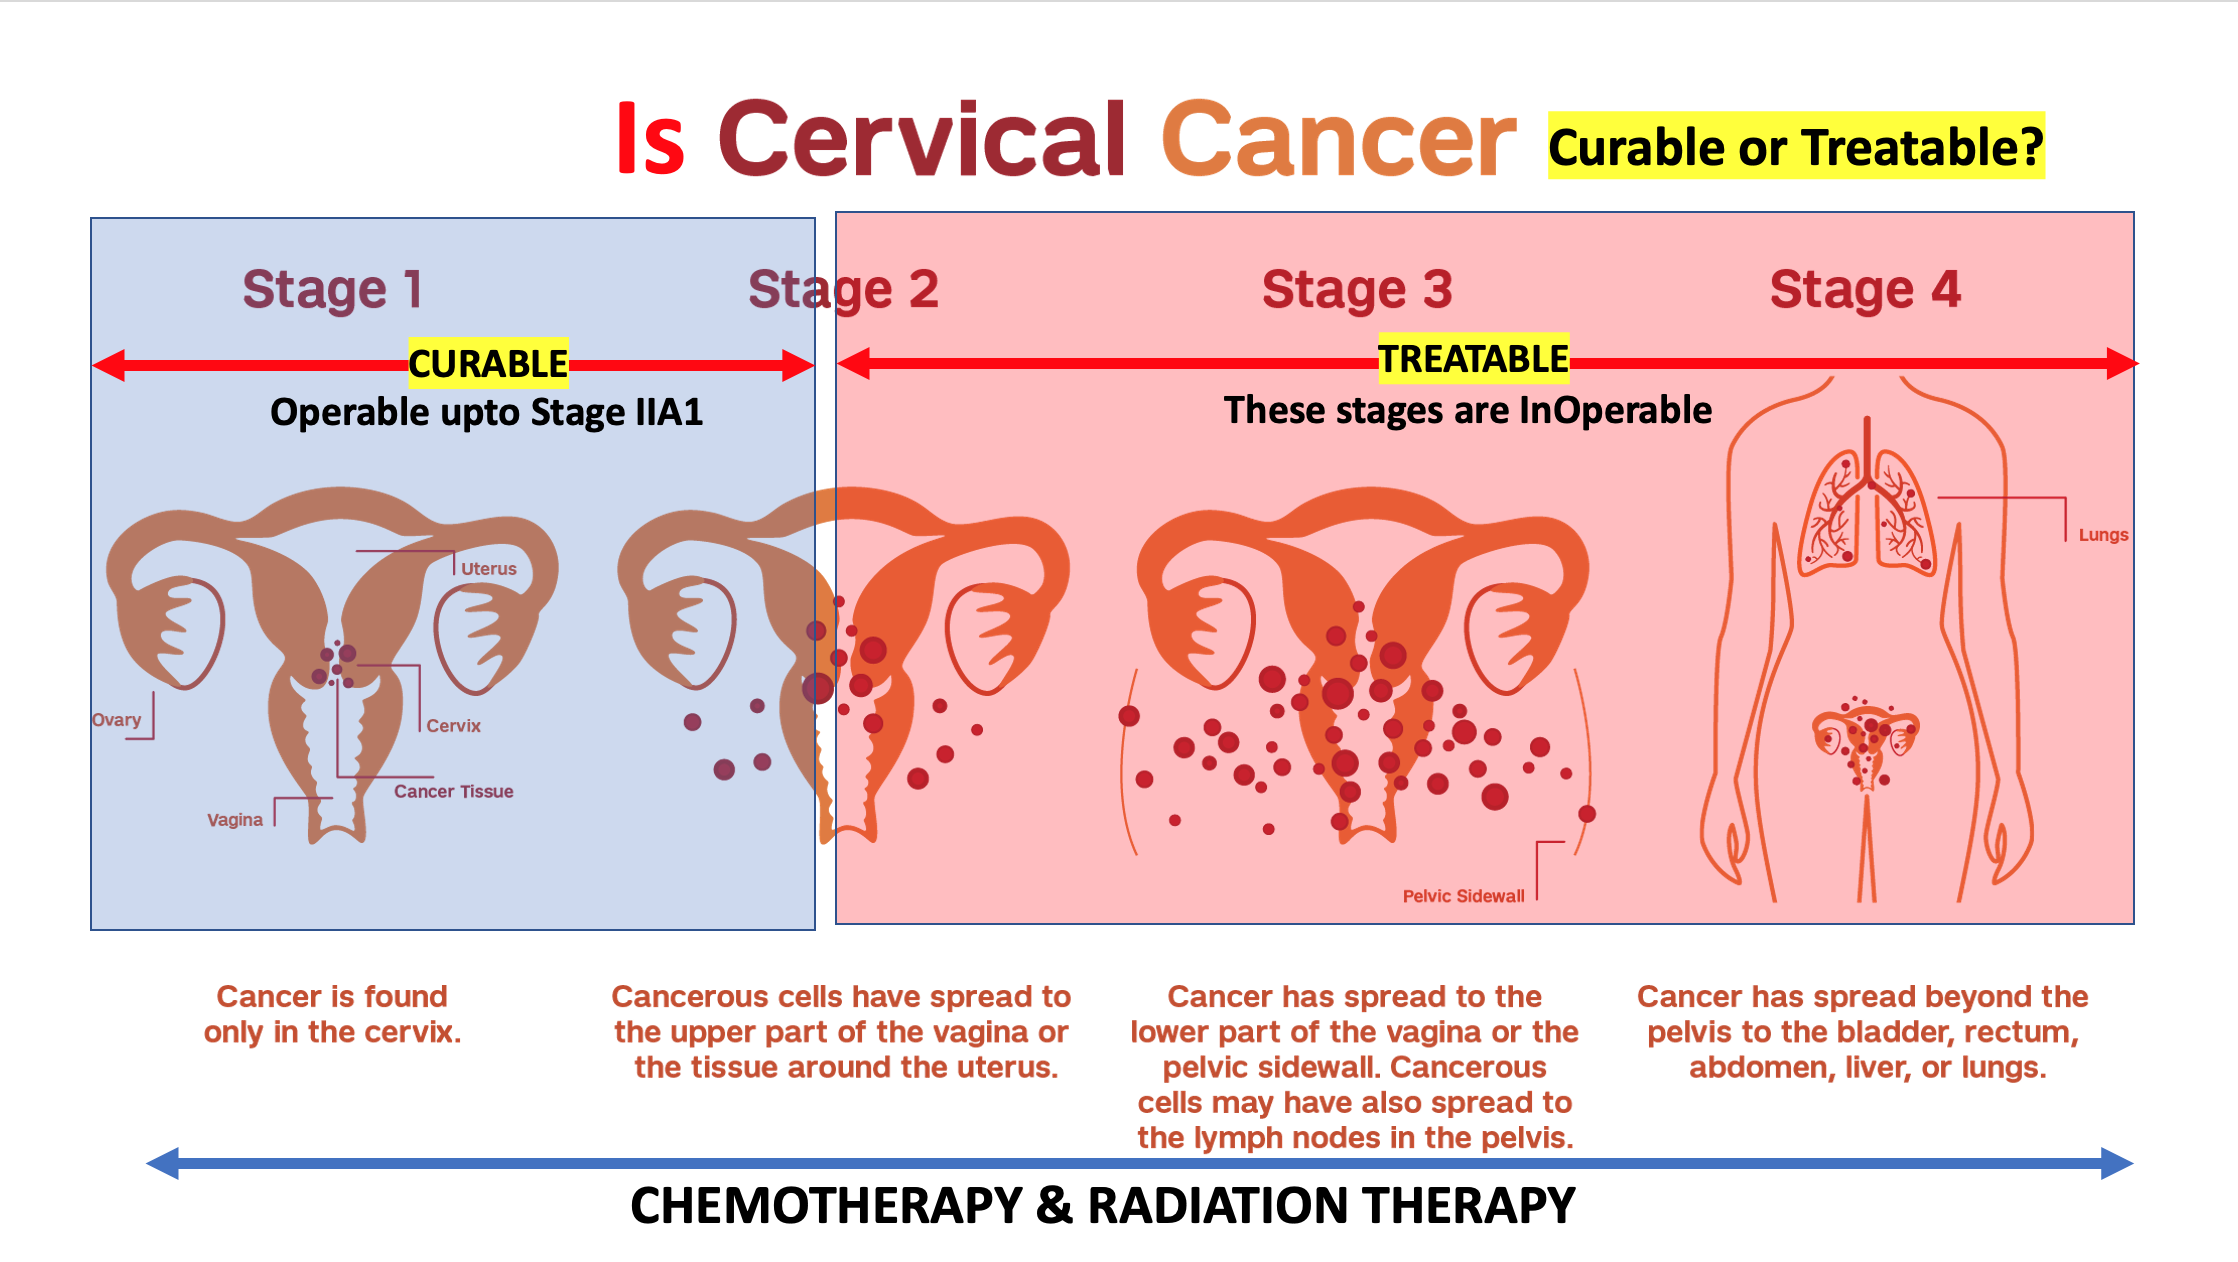 cervical cancer is curable and treatable